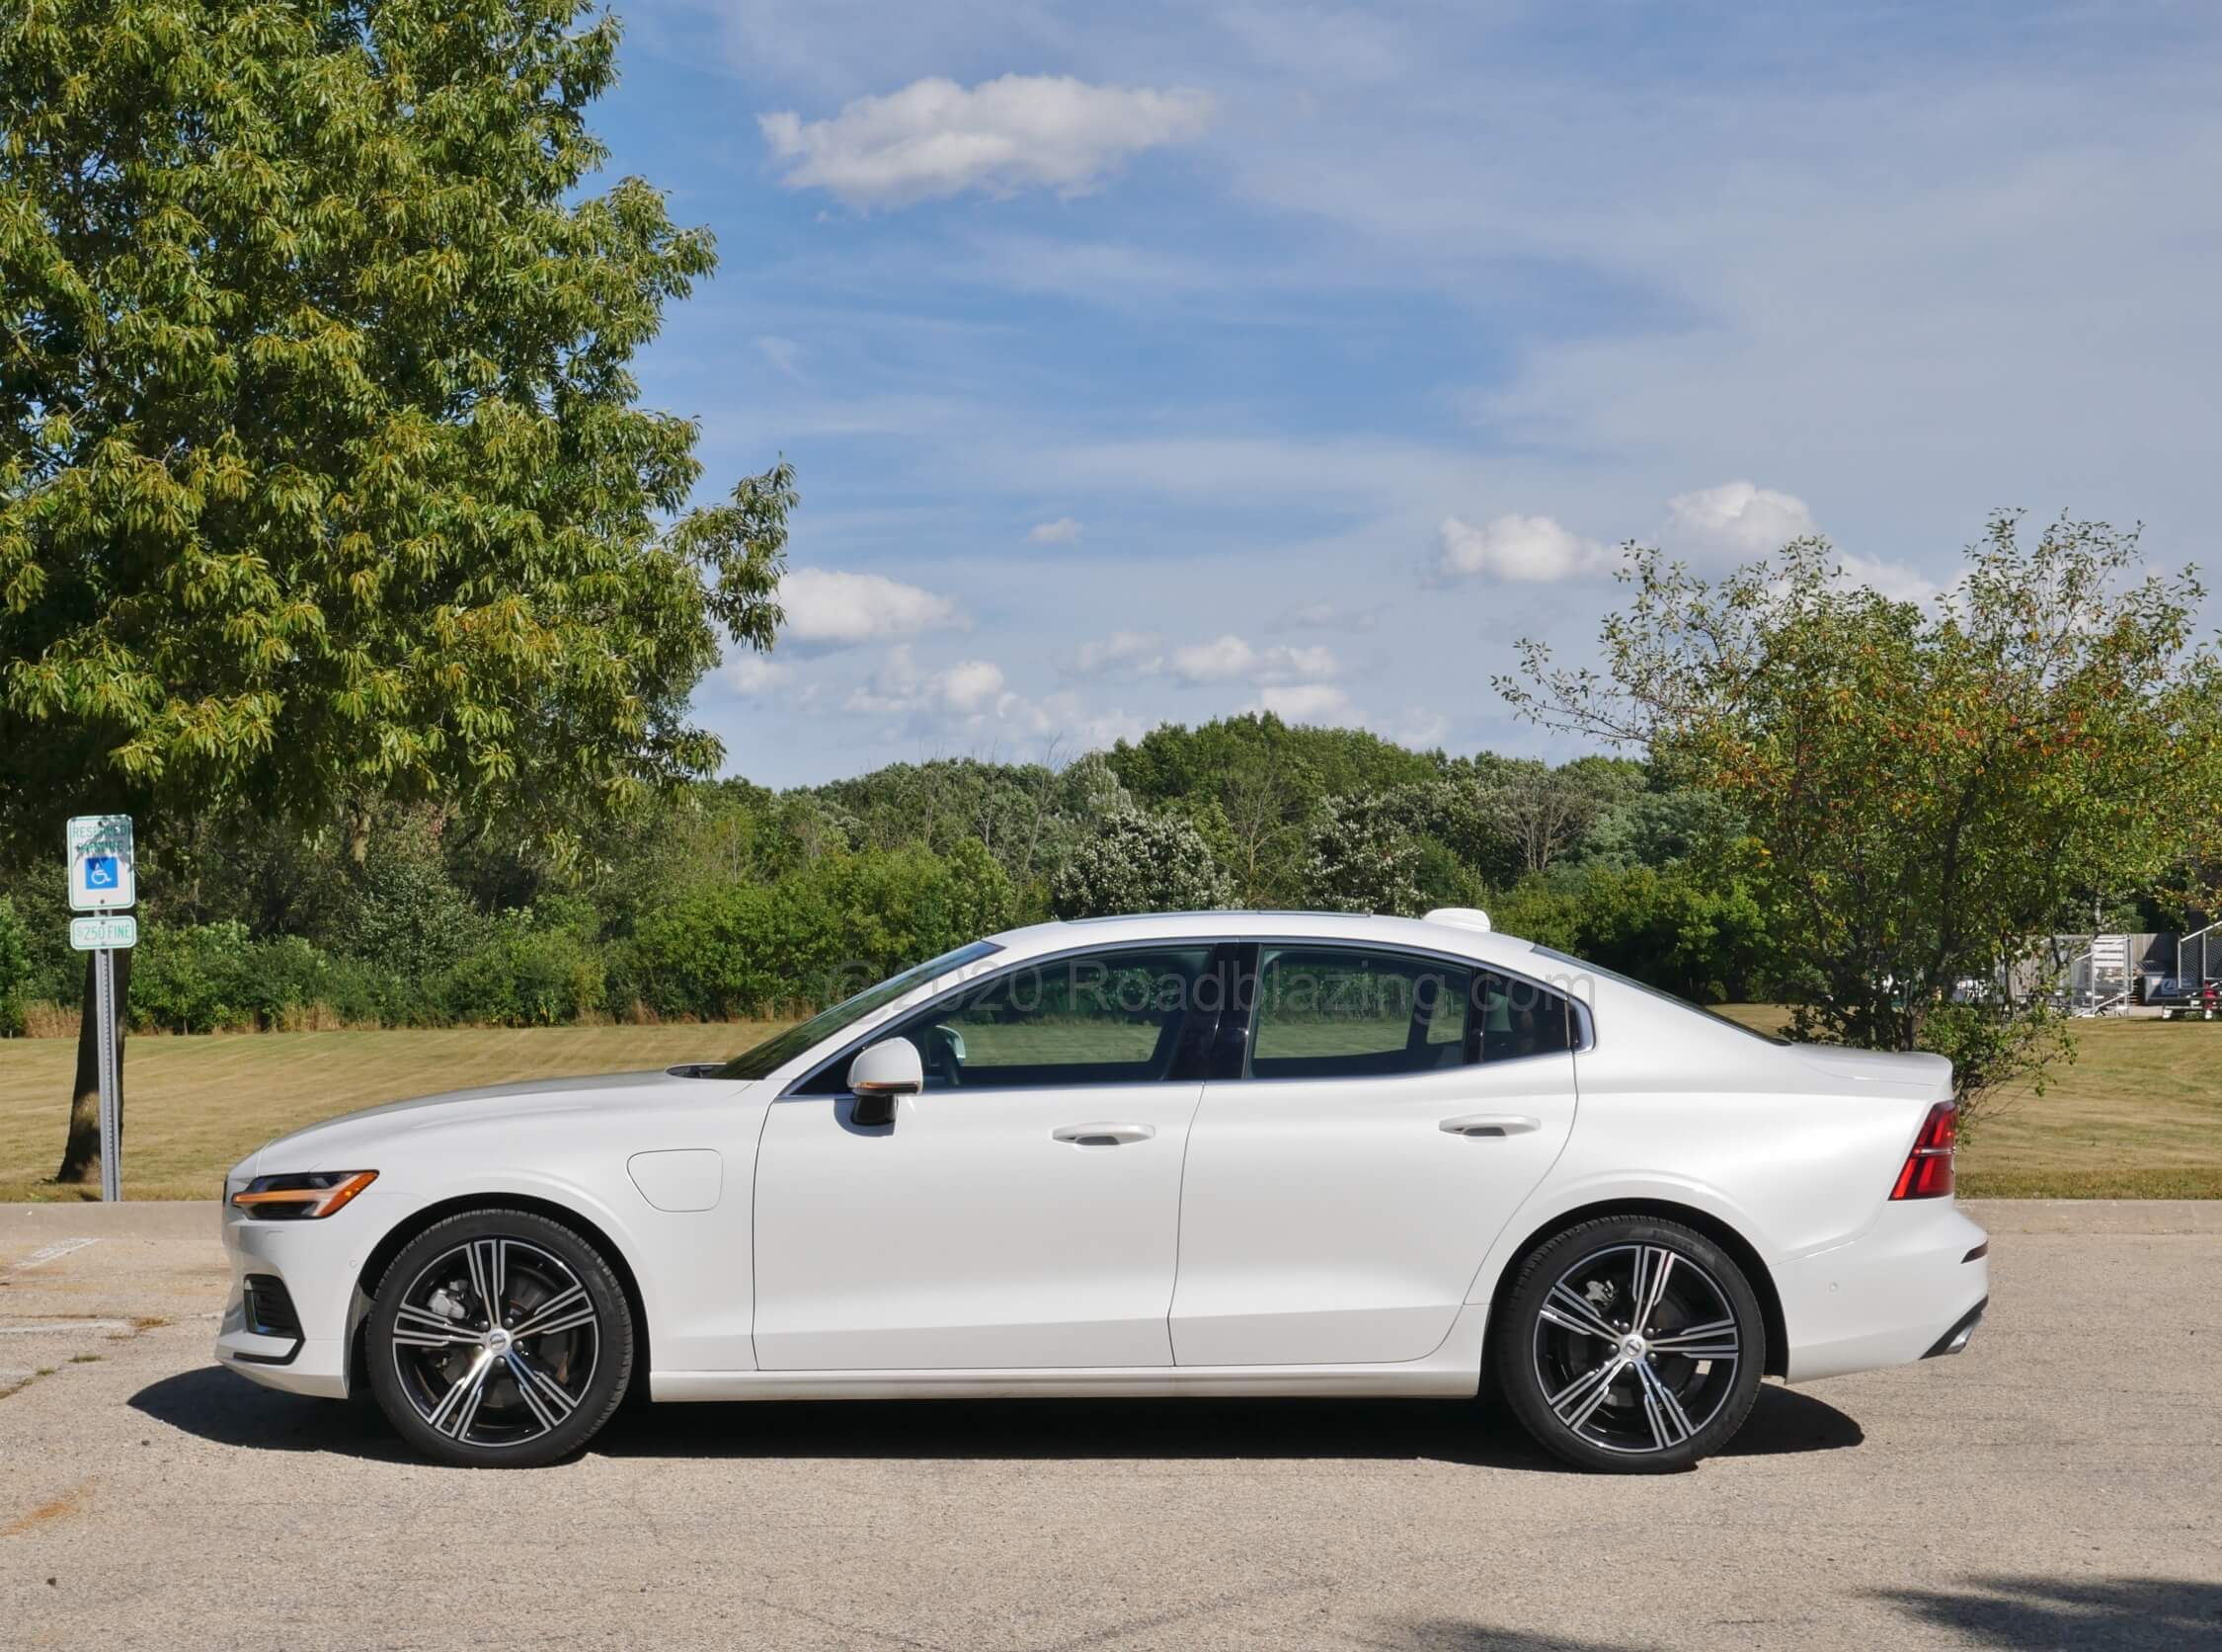 2020 Volvo S60 T8 AWD PHEV: Crystal White Pearl shimmers on the sleek Coke bottle profile